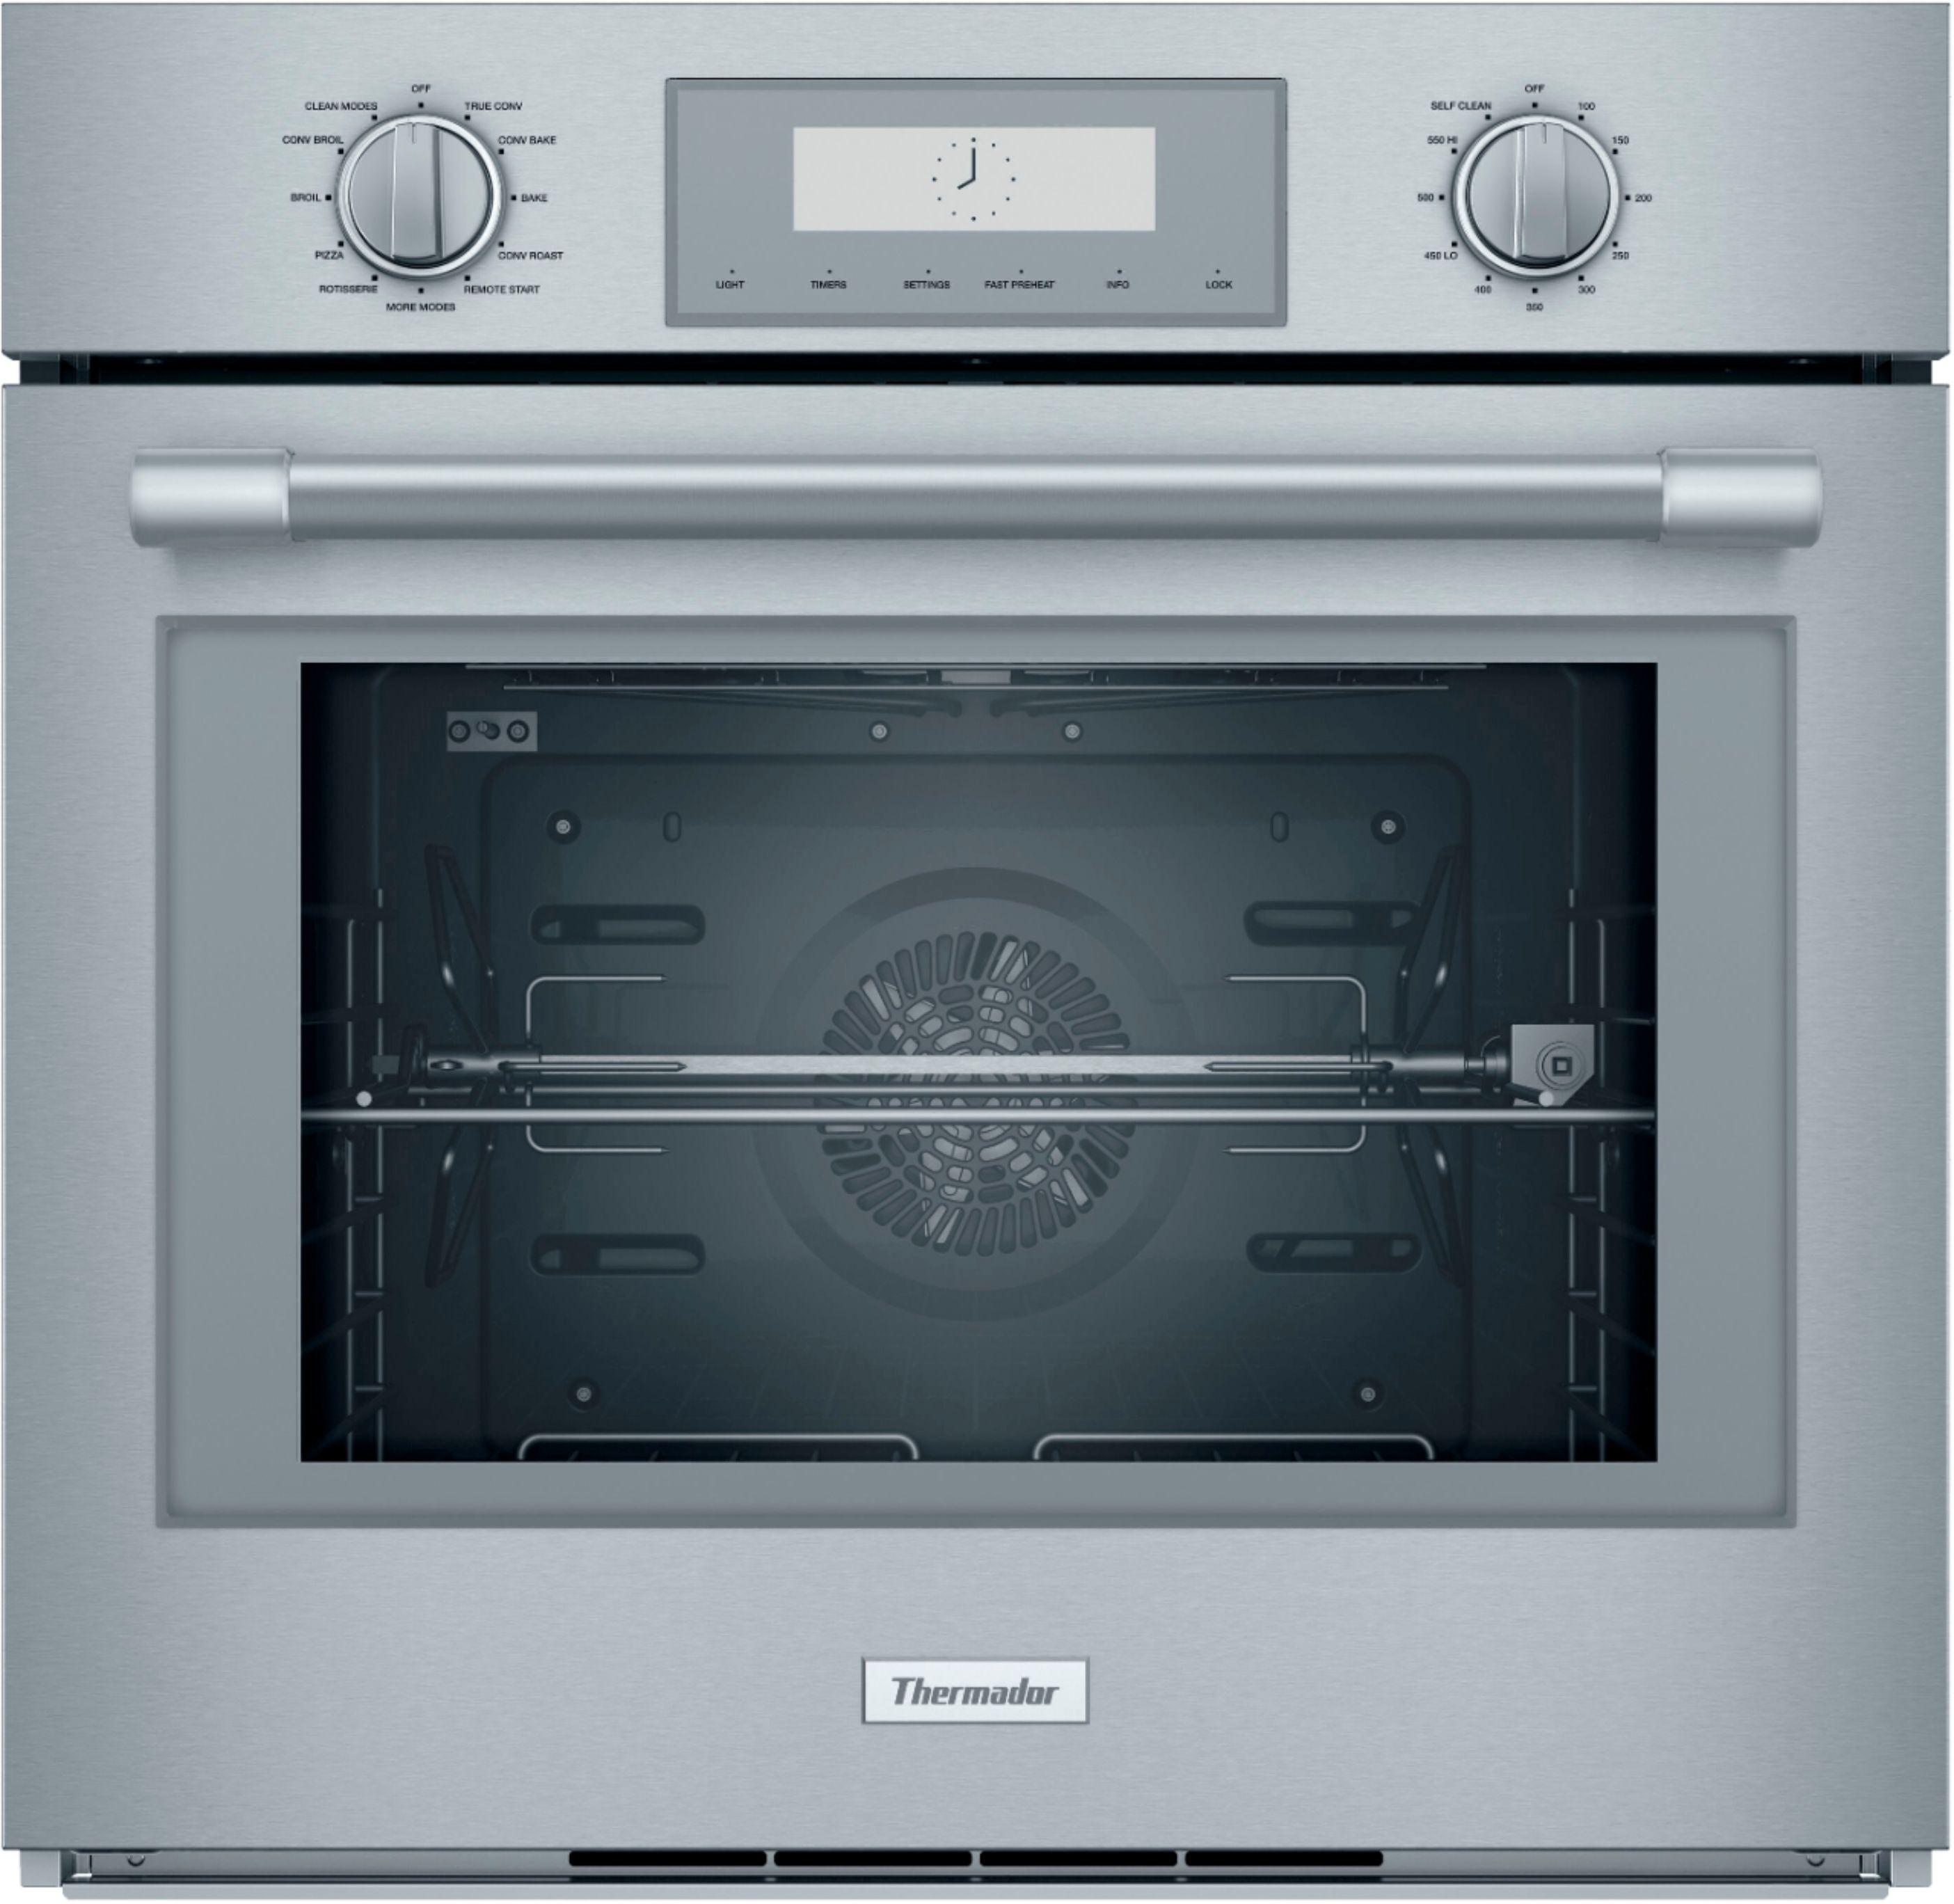 Thermador - PROFESSIONAL SERIES 30" Built-In Single Electric Convection Wall Oven - Stainless steel